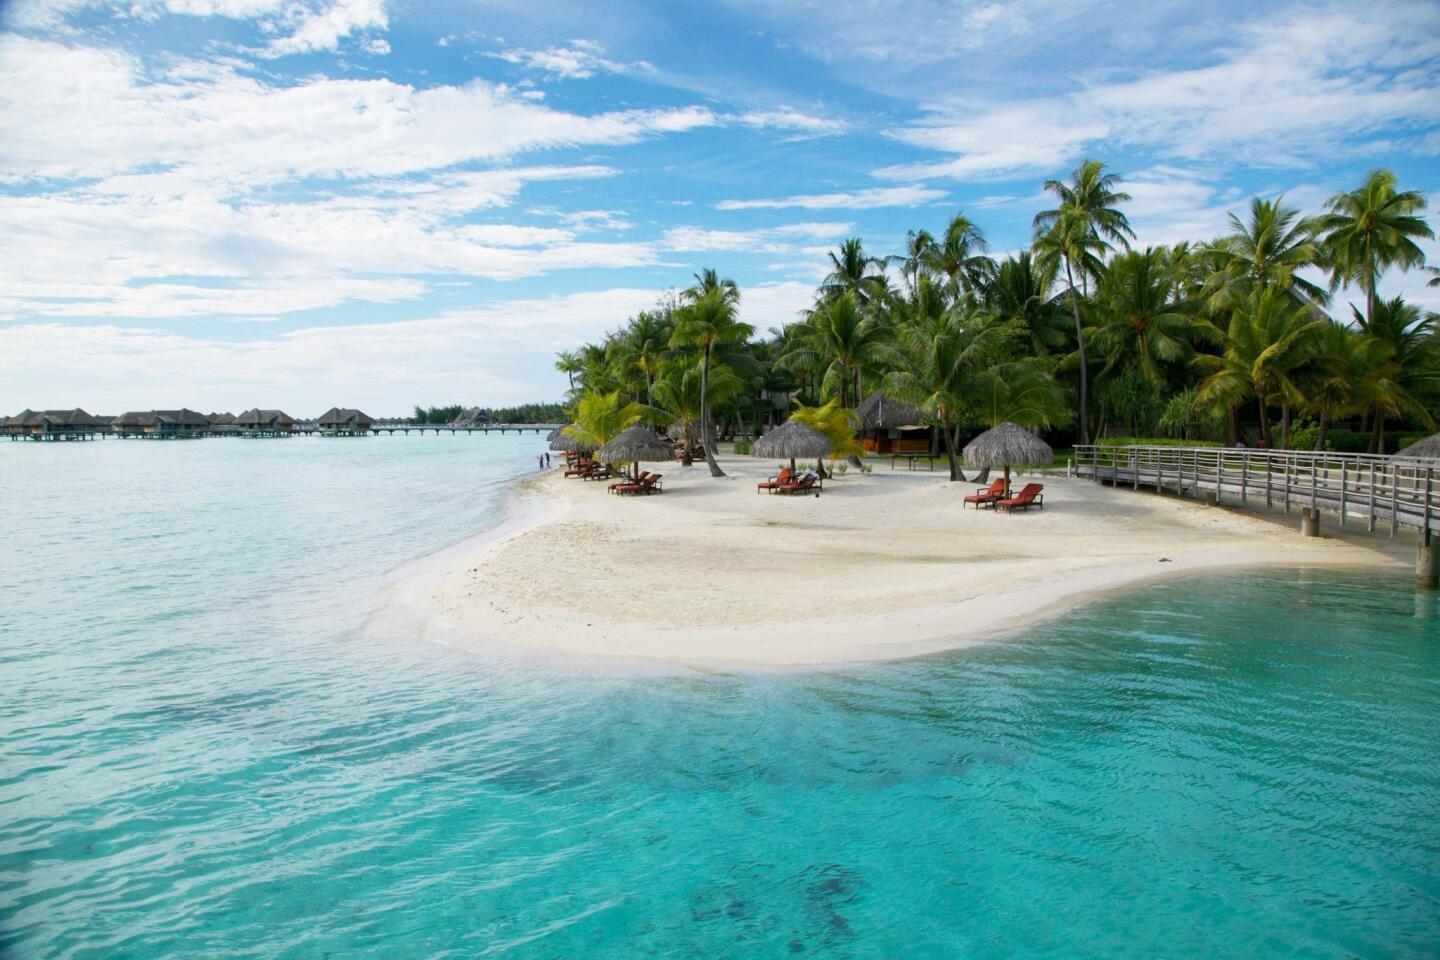 Bora Bora is one of the hottest honeymoon spots. Think scuba diving, clear blue water and private bungalows.